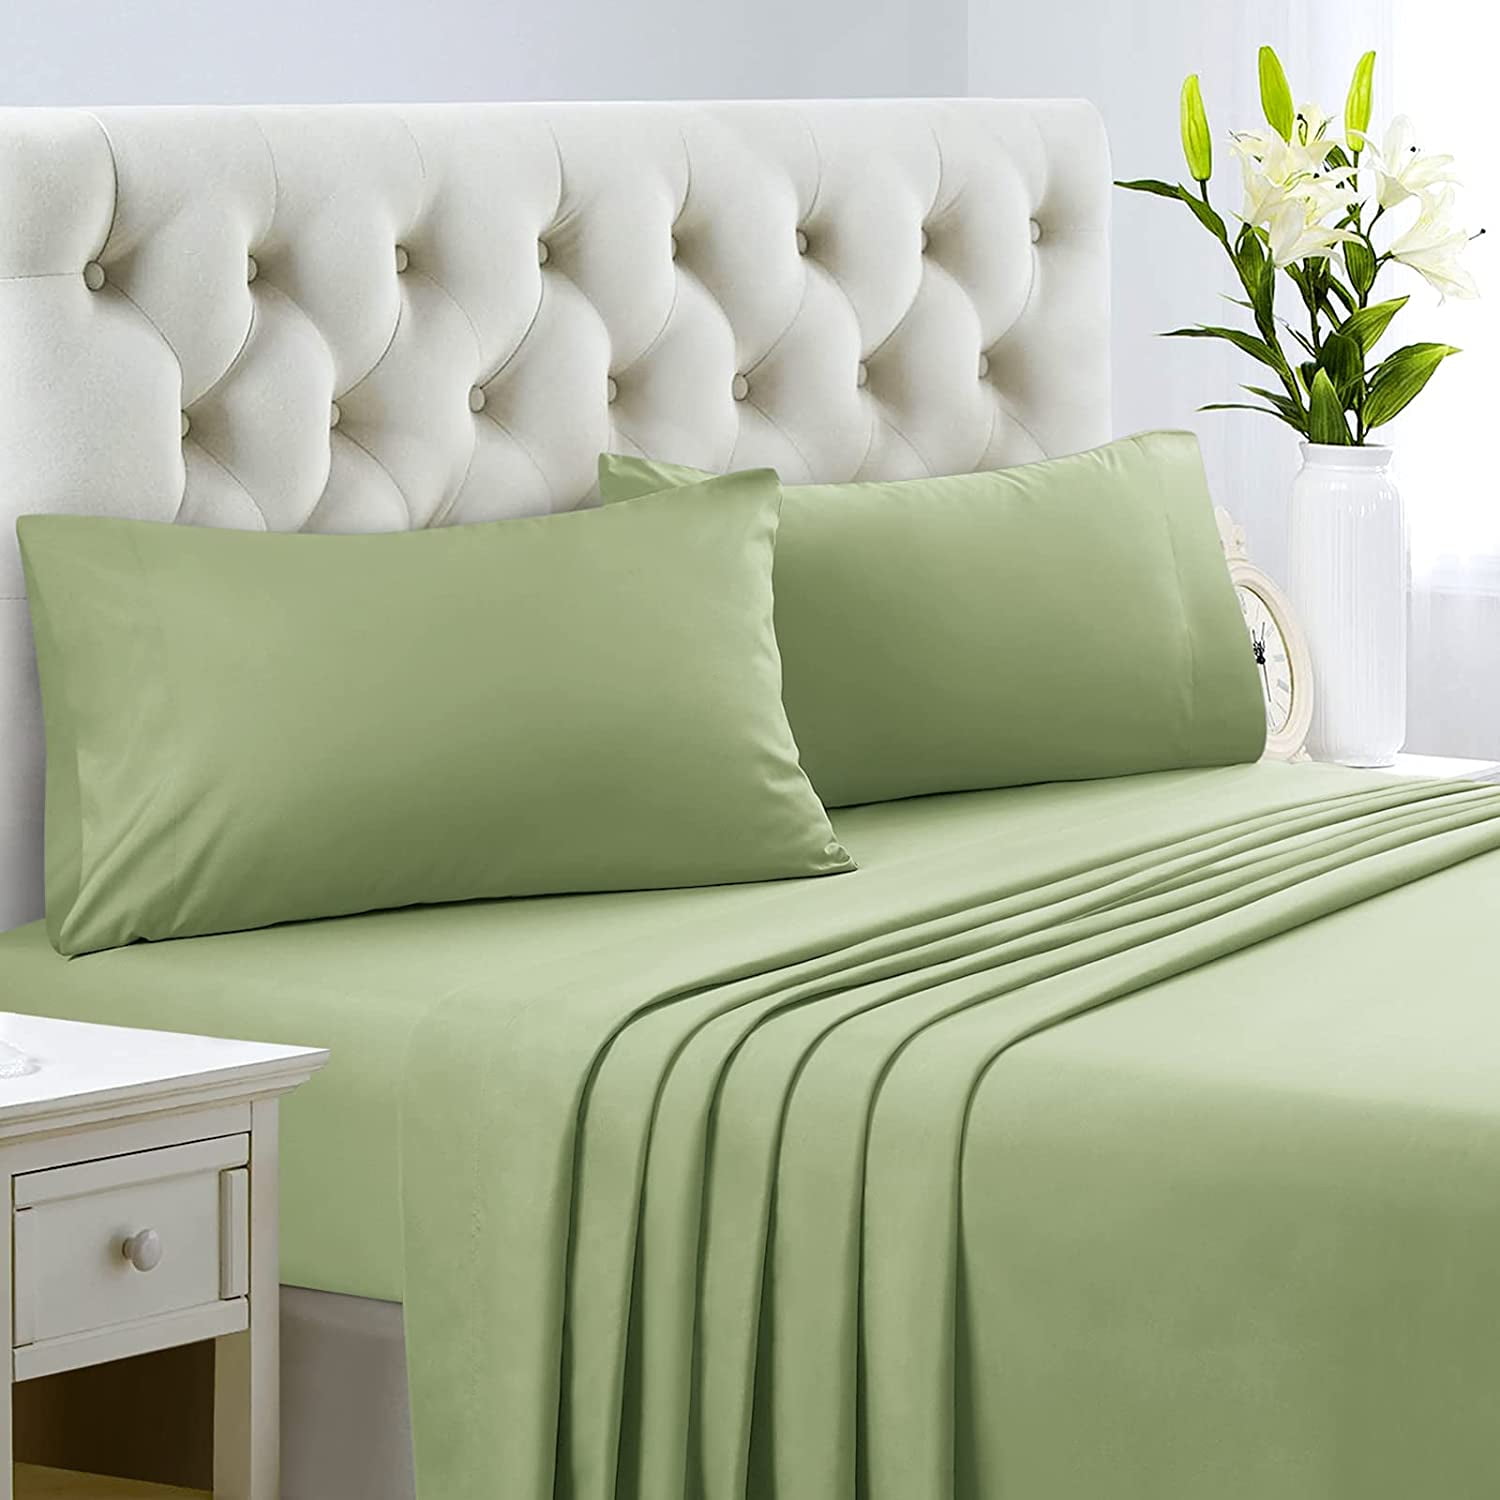 1200 TC Egyptian cotton bed sheet set solid color & size sheet 